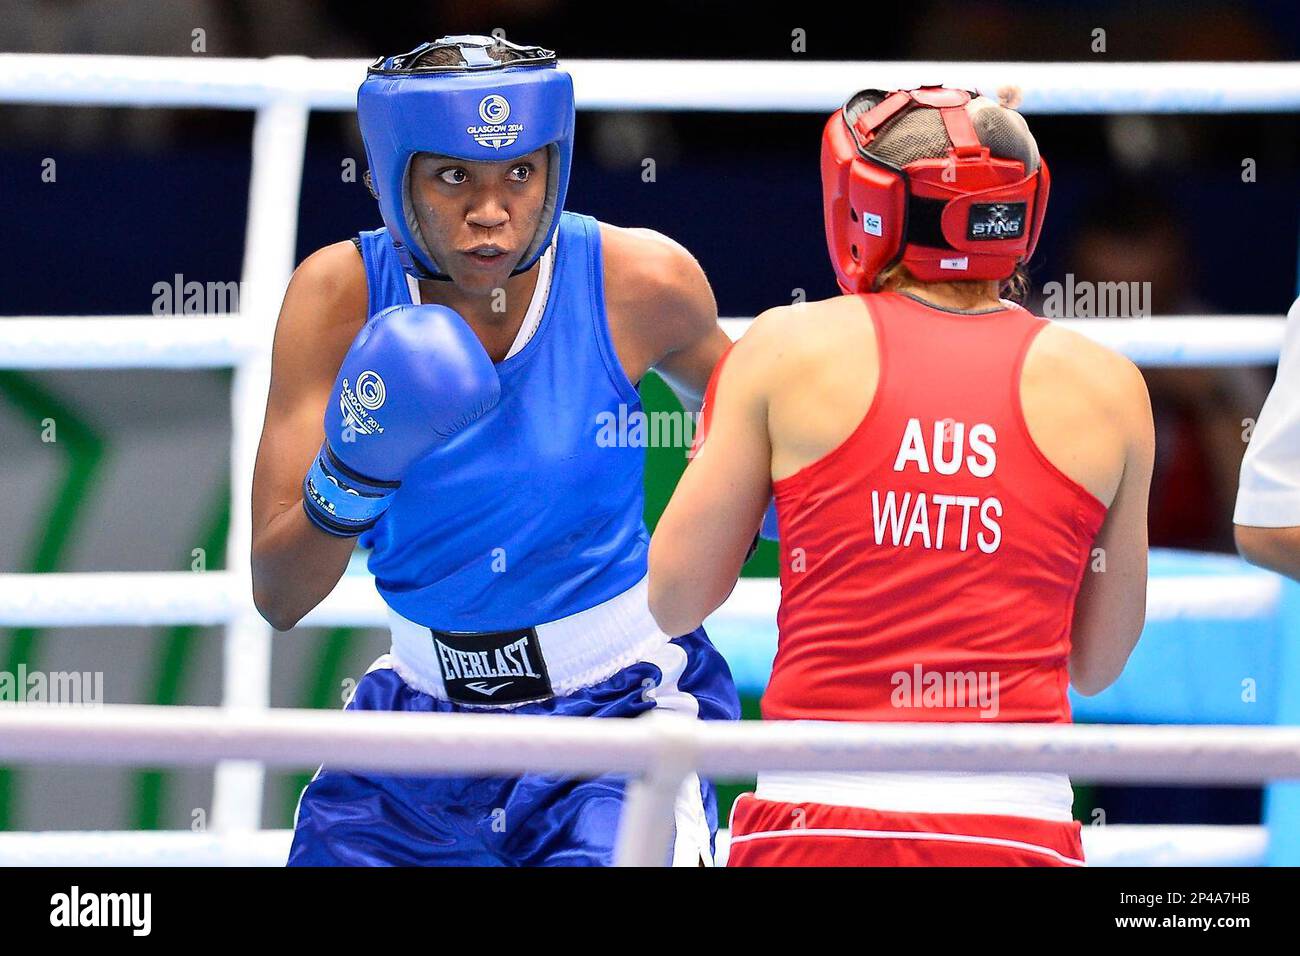 Shelley Watts of AUS and Isabelle Ratna of MRI compete in light weight 57-60kg quarterfinal during Commonwealth Games Boxing, Wednesday, July 30, 2014 in Glasgow, United Kingdom